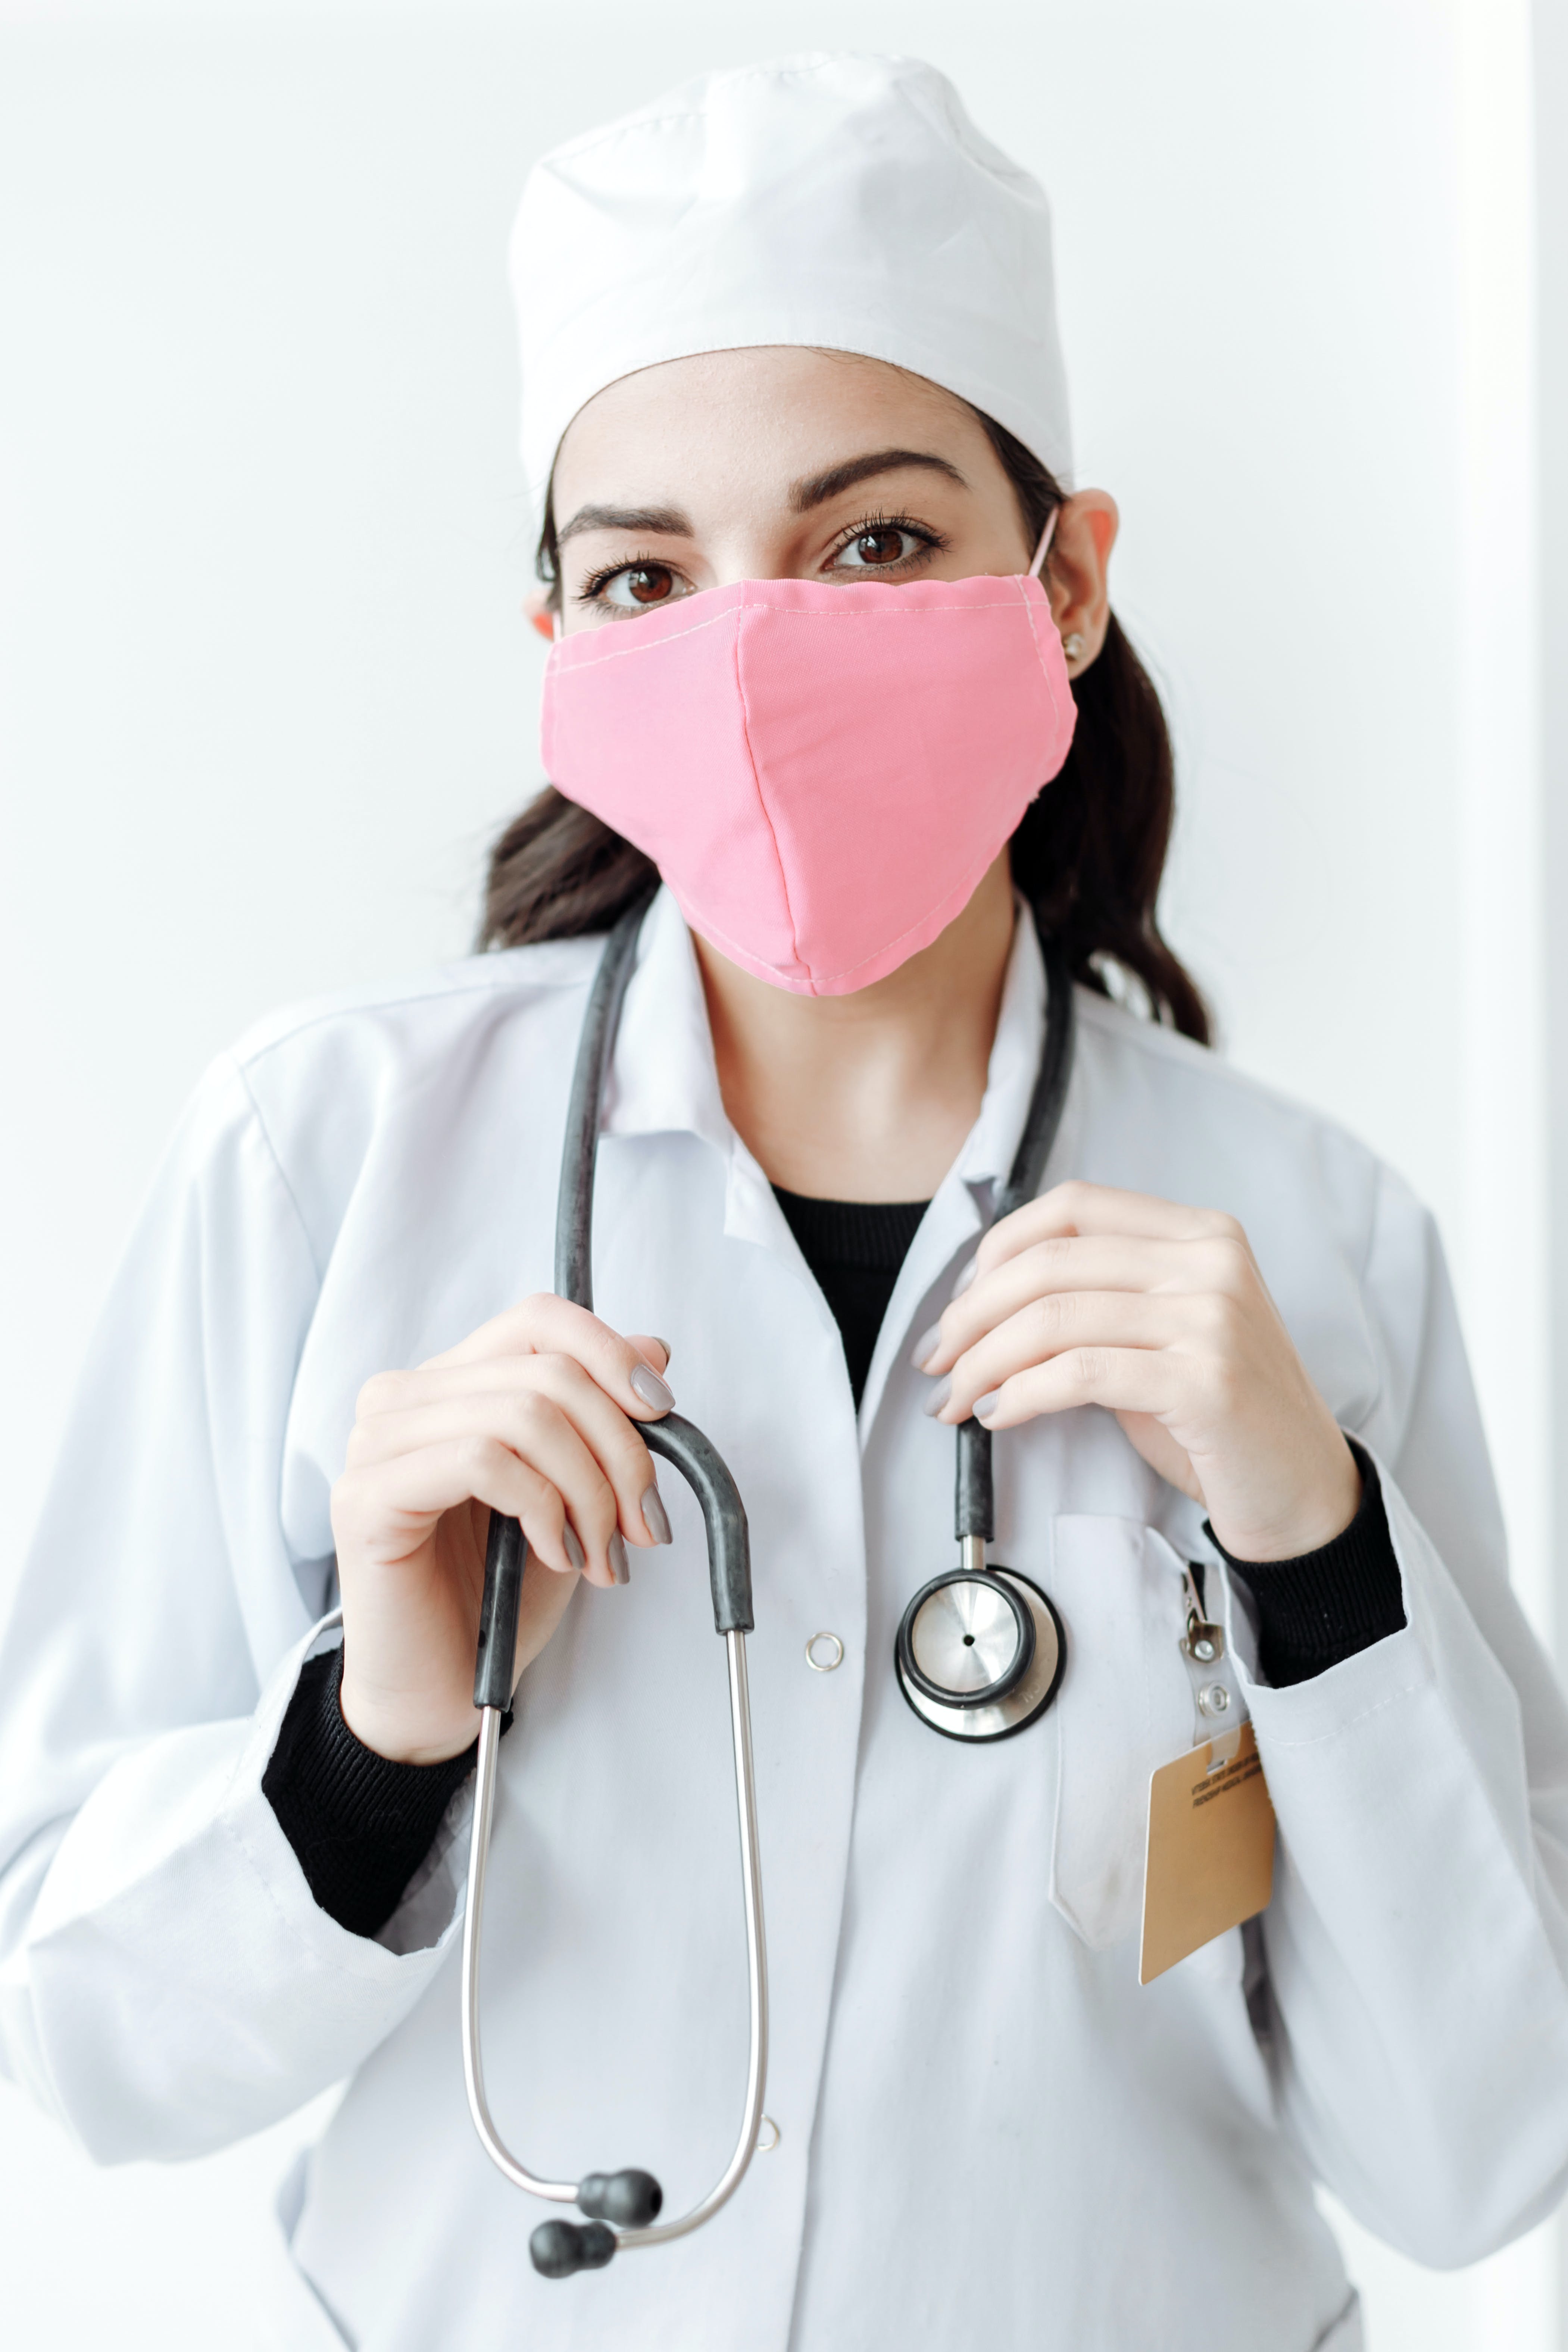 A female doctor wearing a pink facemask. | Source: Pexels